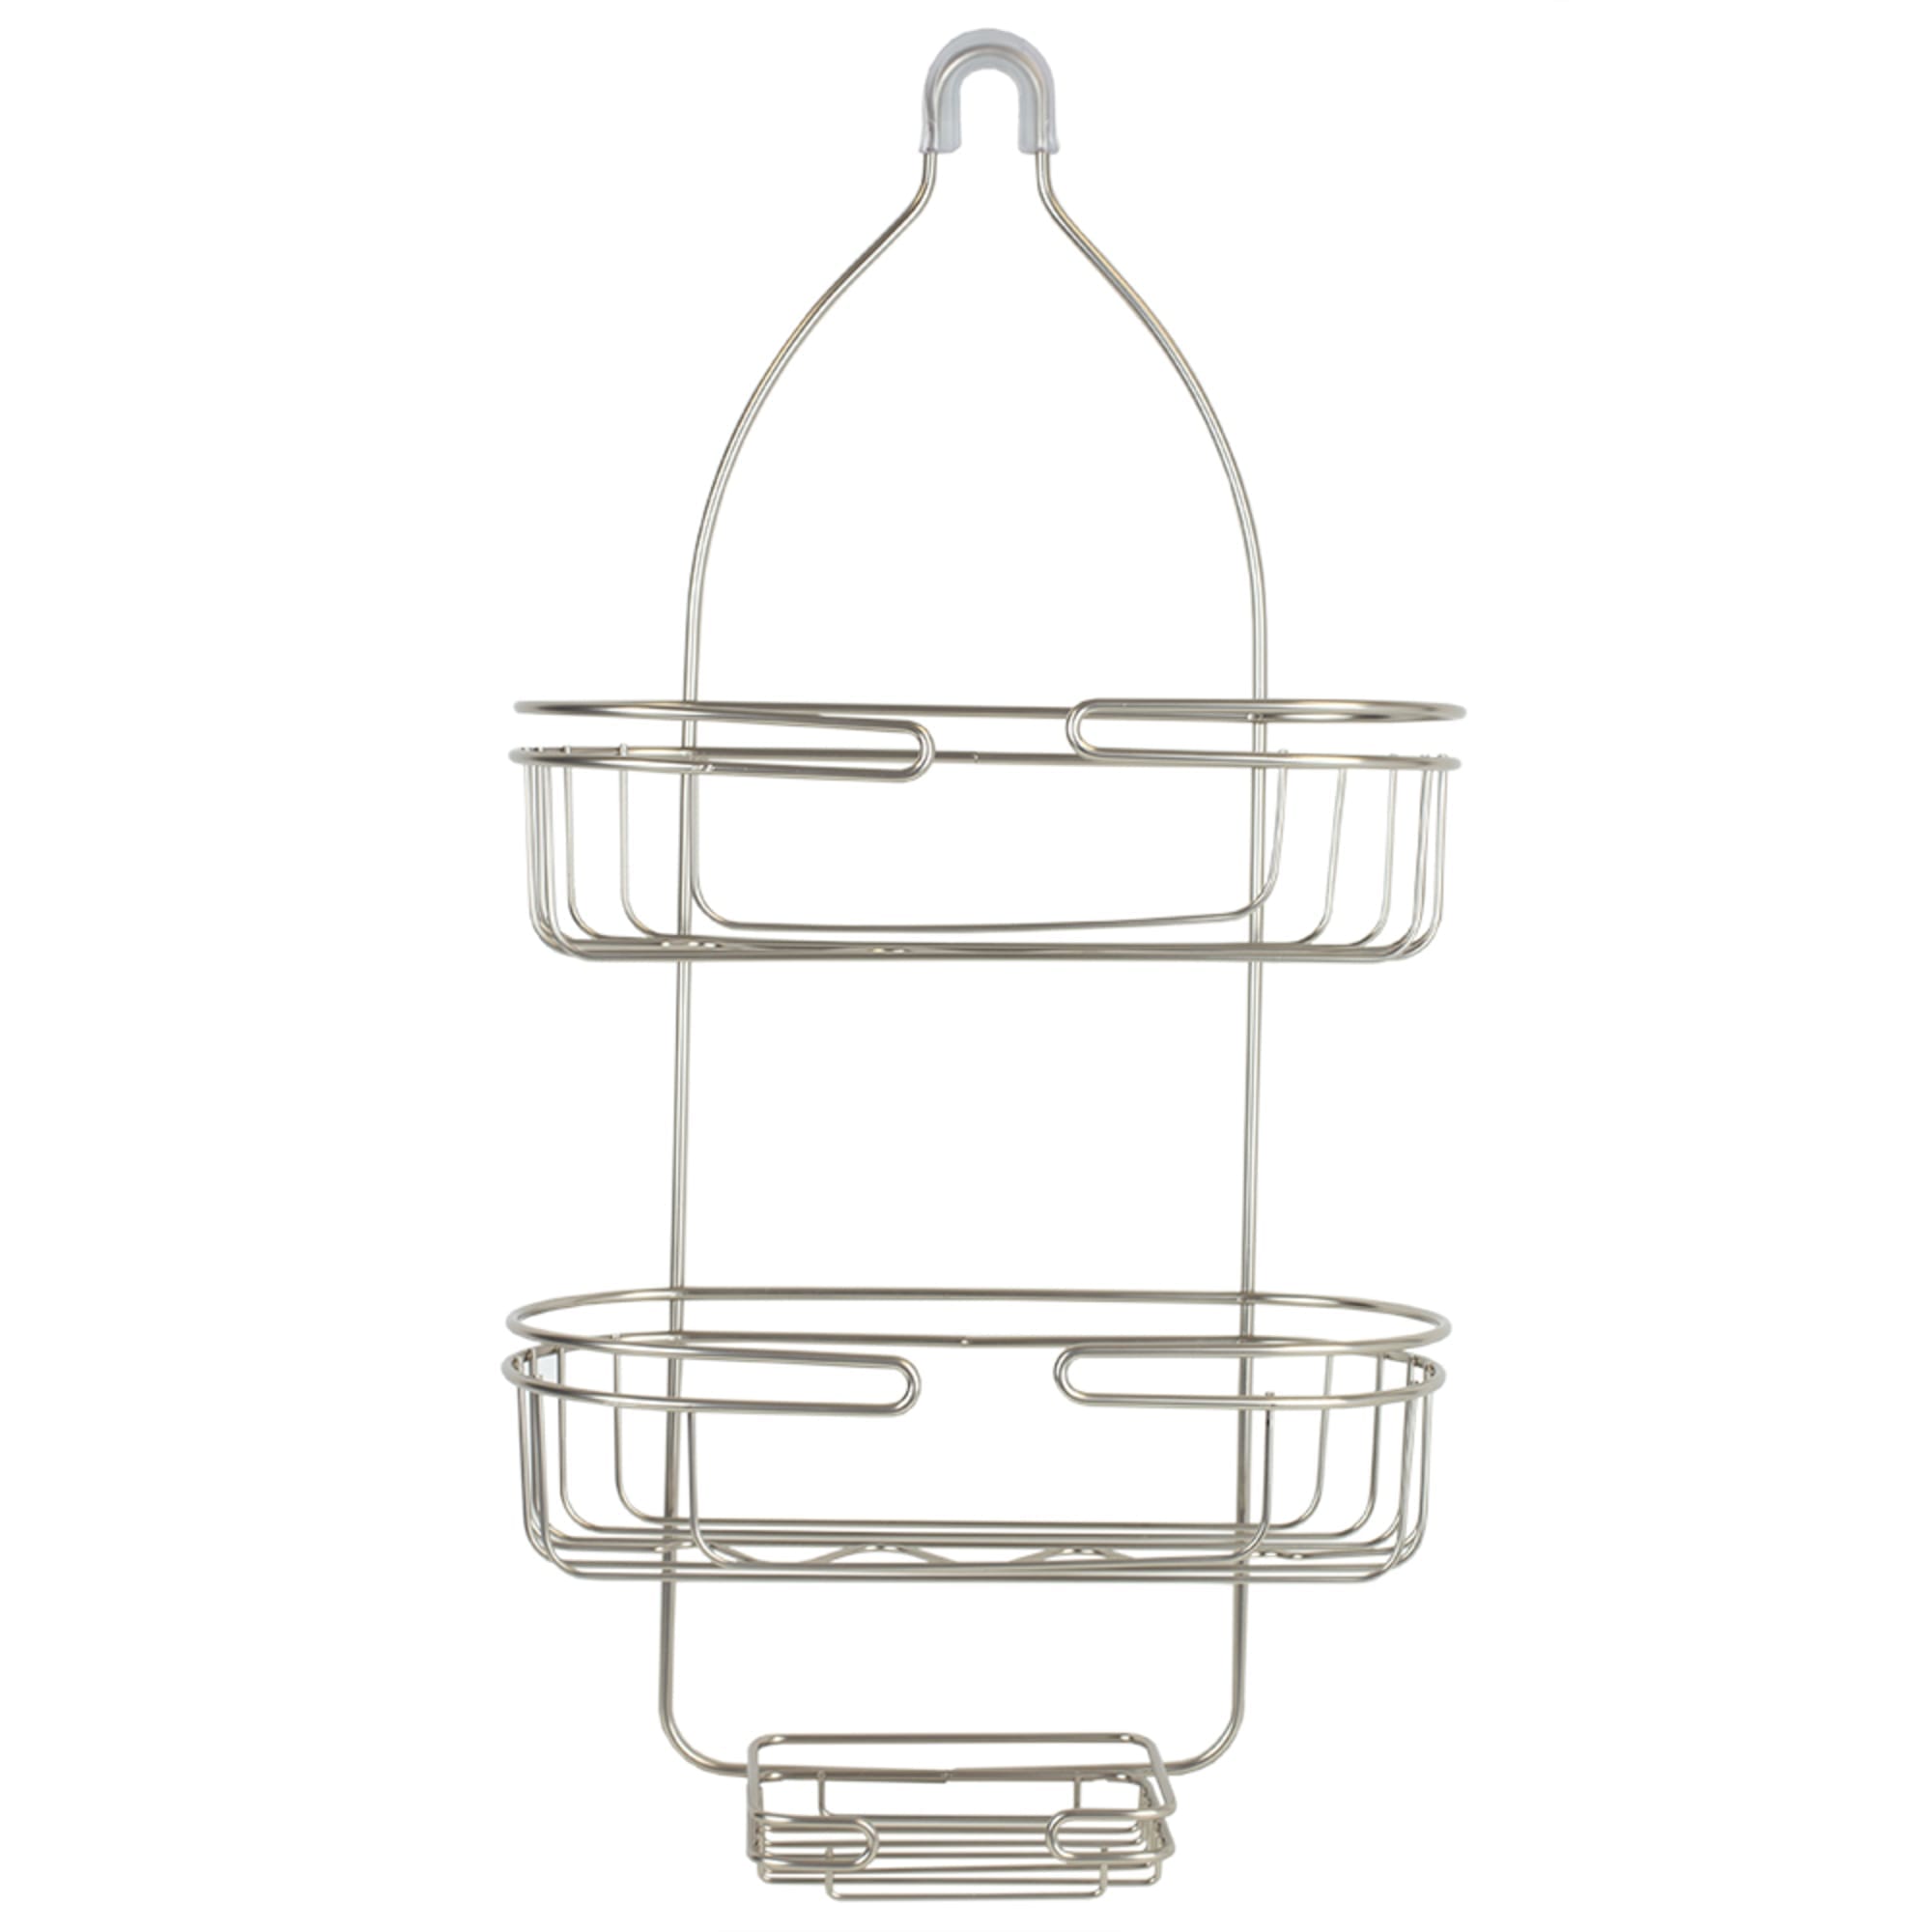 Home Basics Element Shower Caddy, Satin Nickel $12.00 EACH, CASE PACK OF 6